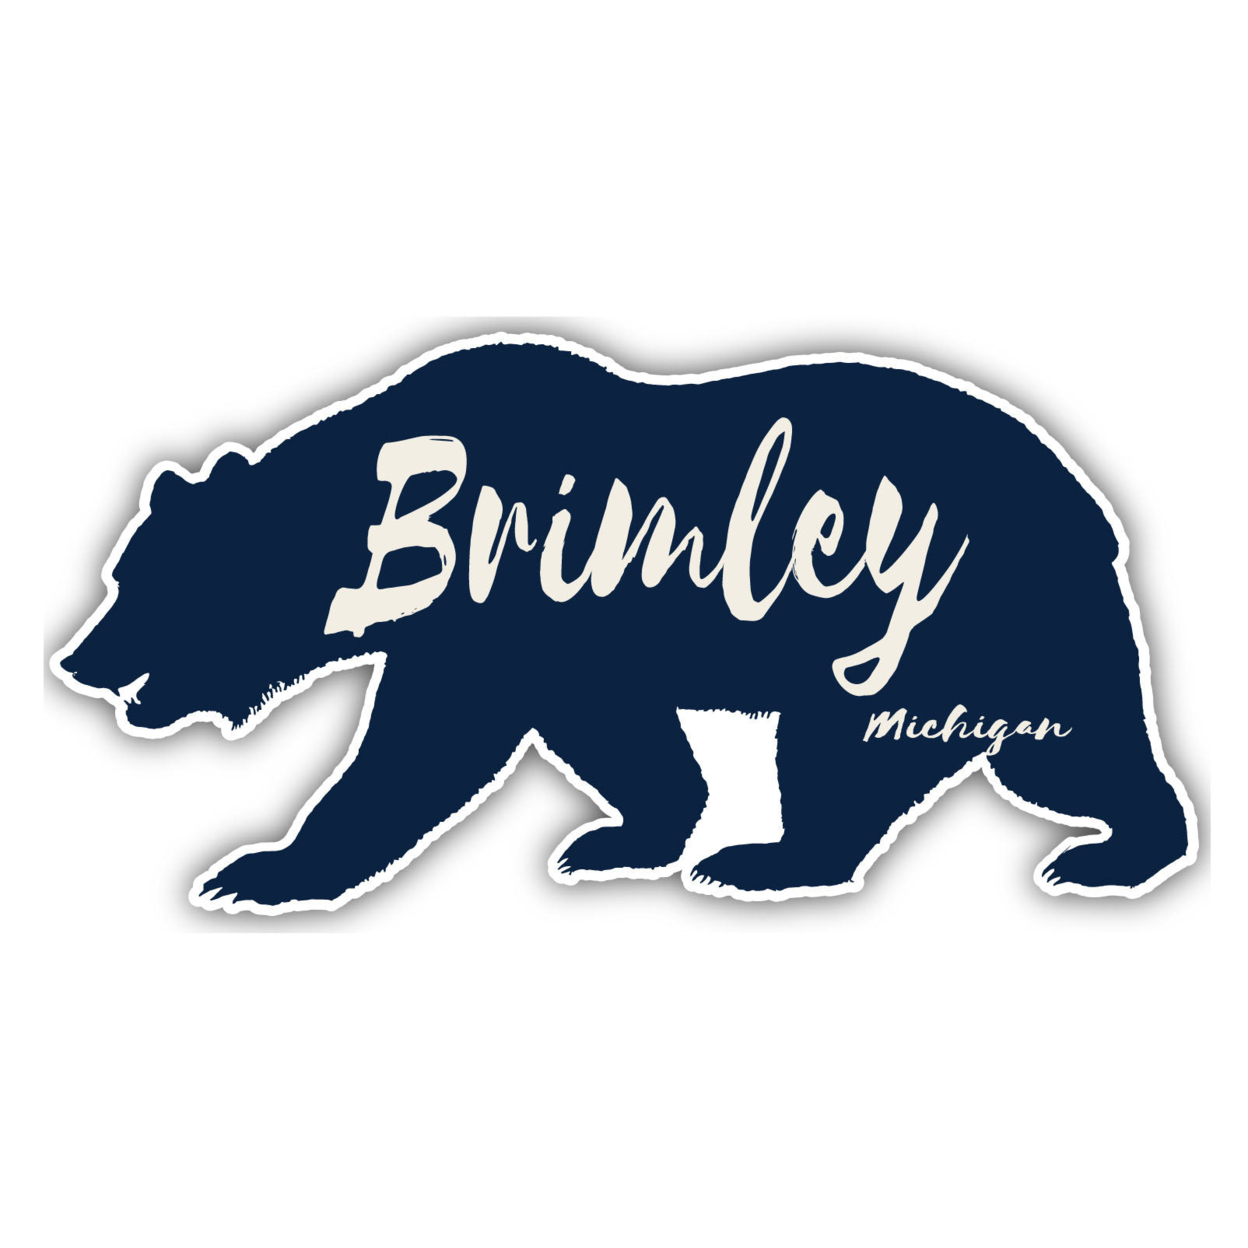 Brimley Michigan Souvenir Decorative Stickers (Choose Theme And Size) - 4-Pack, 8-Inch, Bear